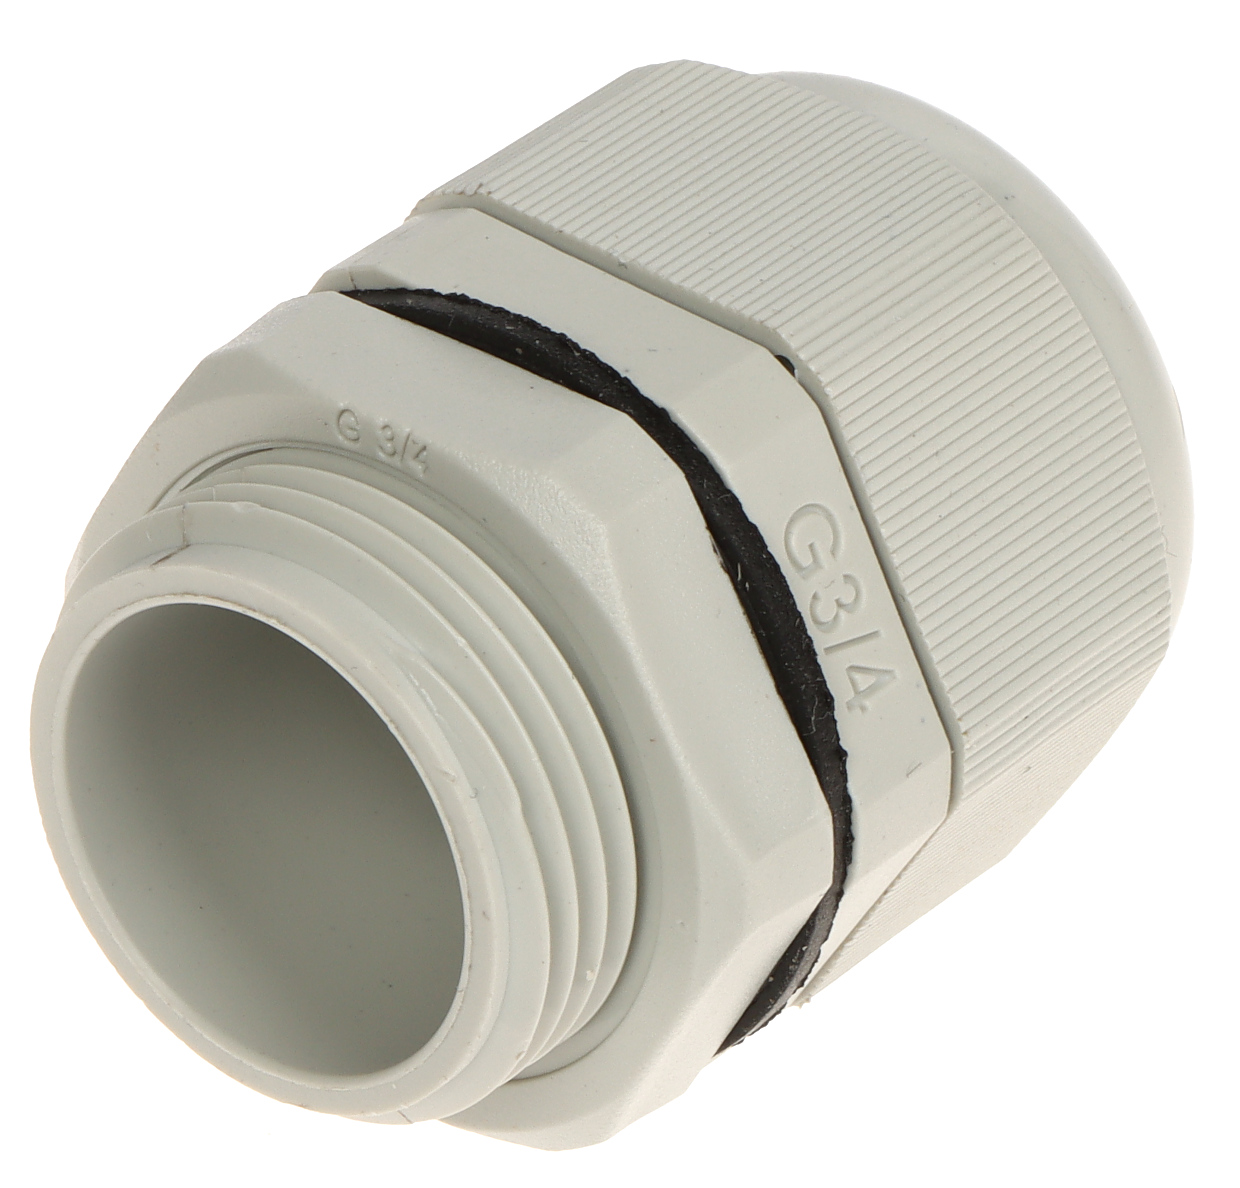 CABLE GLAND G3/4 IP68 3/4 " - Installation Holders, Bushing and Connections  - Delta